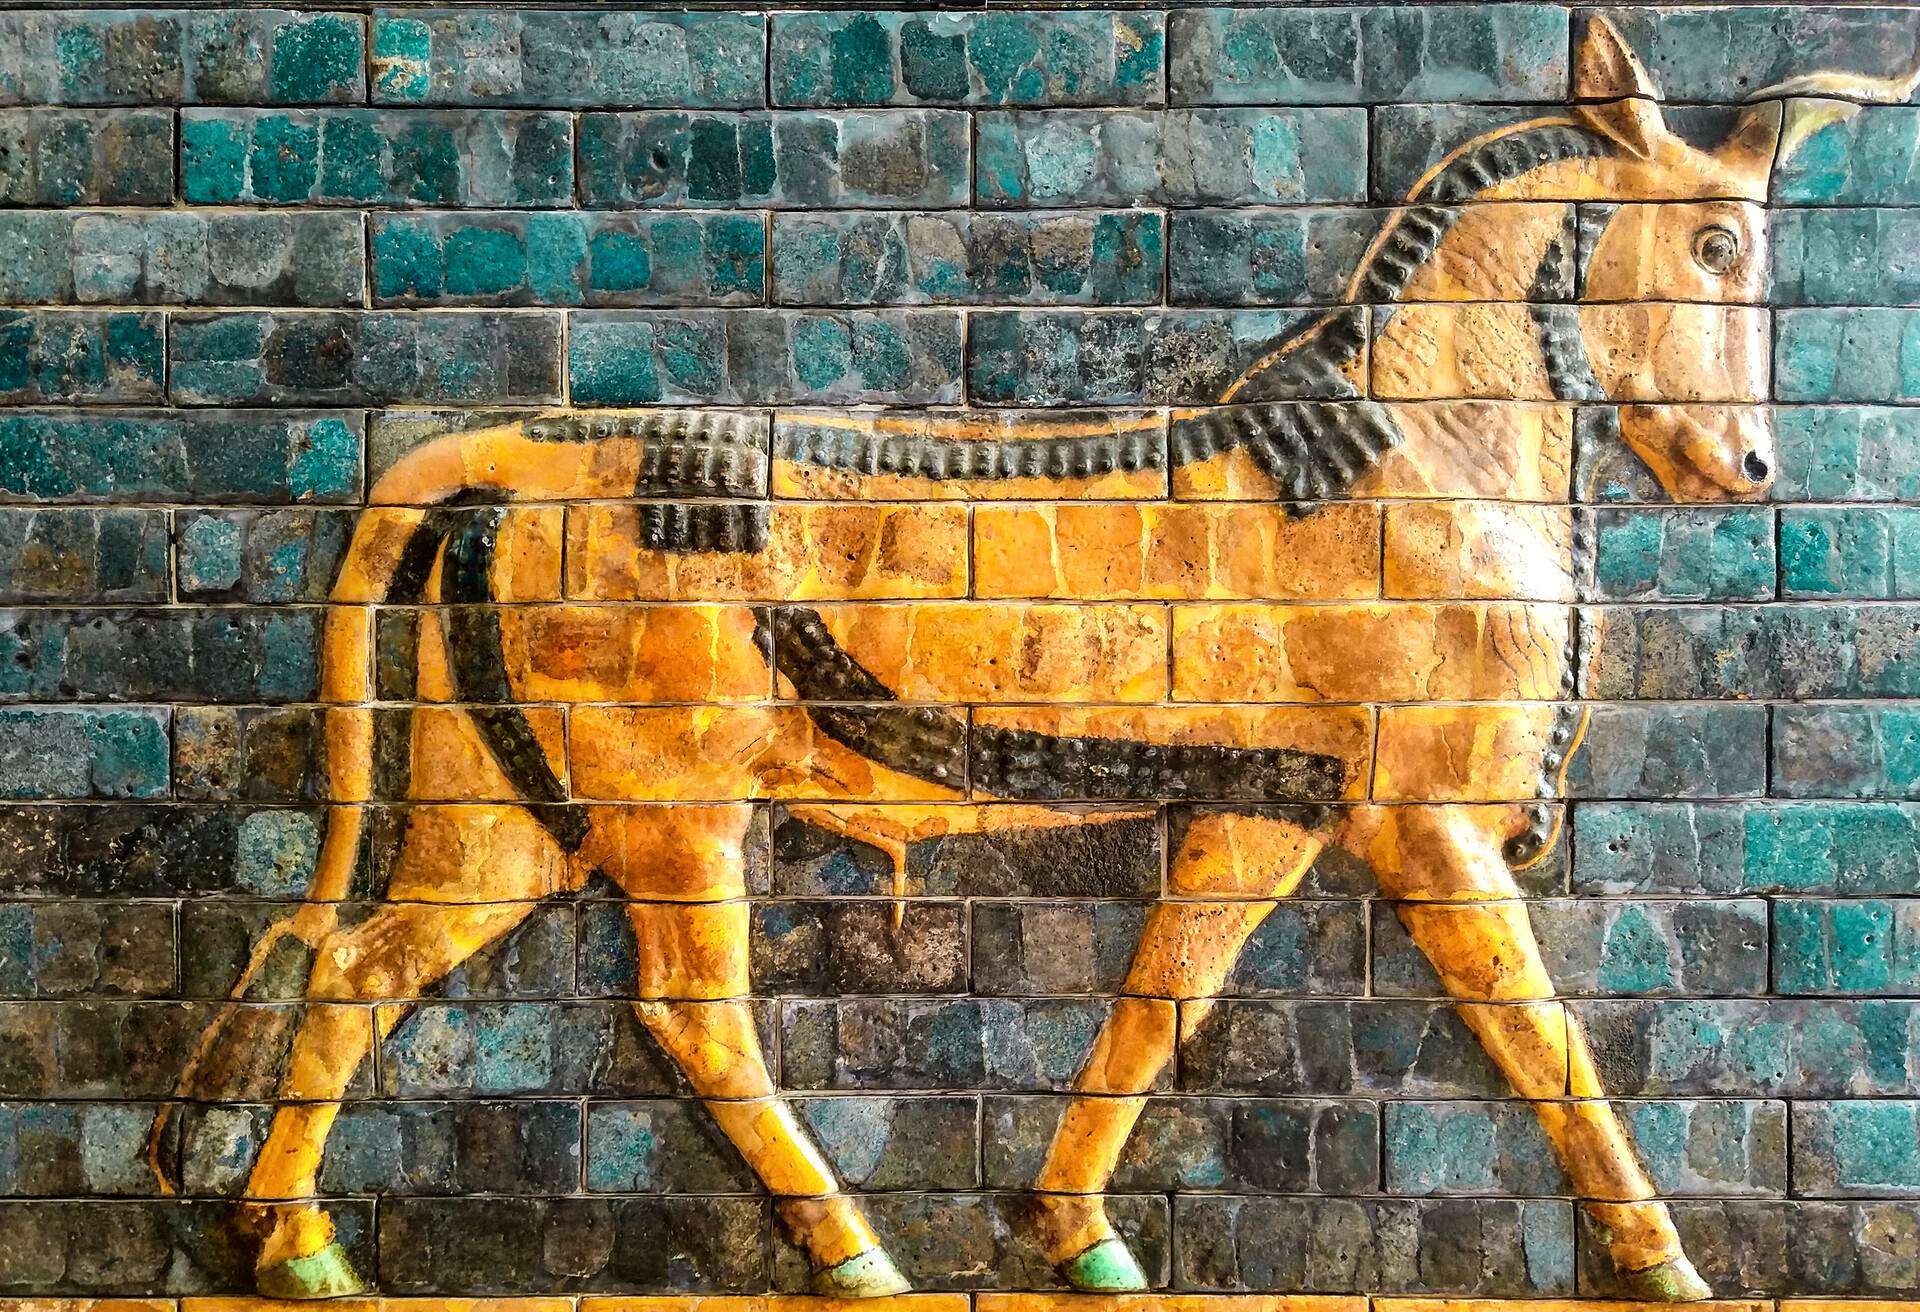 TURKEY_ISTANBUL_ARCHAEOLOOGICAL_MUSEUM_ISHTAR_GATE_FRAGMENT